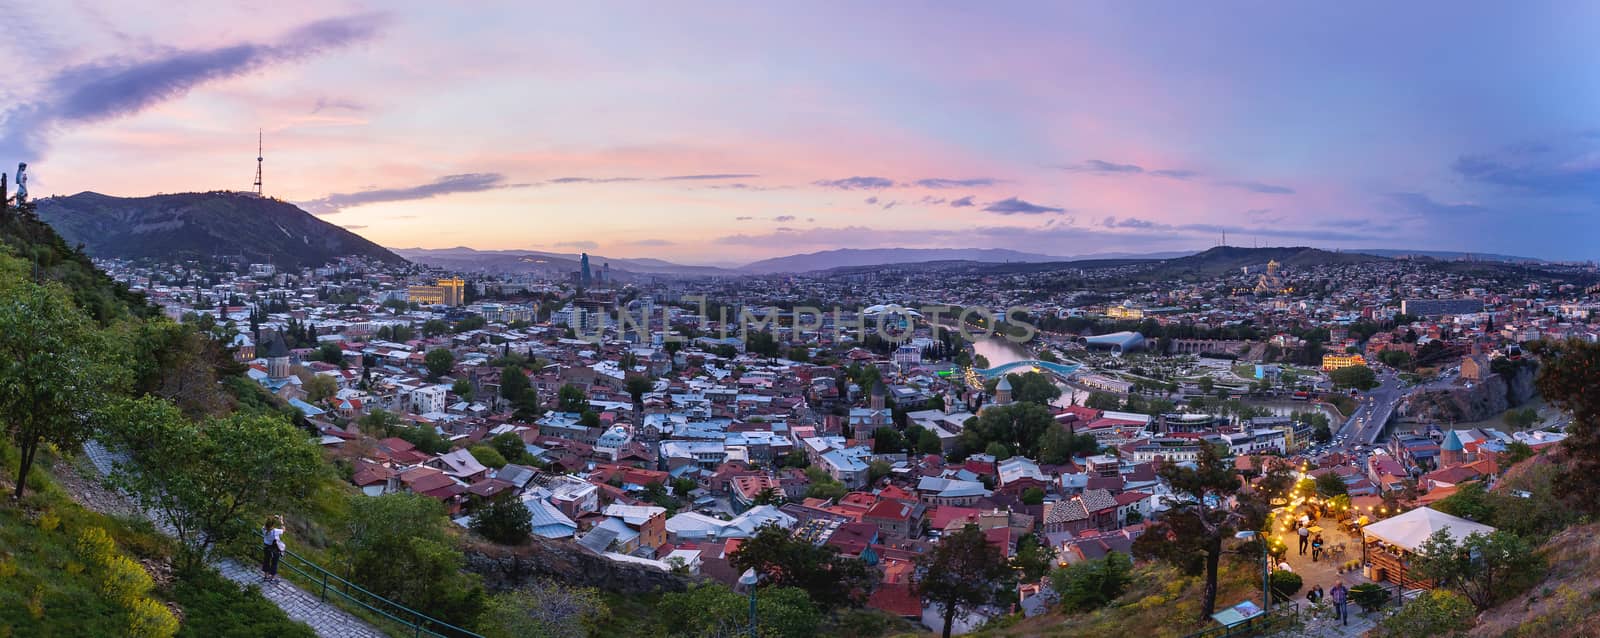 Sunset panorama view of Tbilisi, capital of Georgia country, from Narikala fortress. Famous landmarks - Metekhi church, Holy Trinity Cathedral (Sameba), Presidential Administration, Bridge of Peace with illumination. by aksenovko